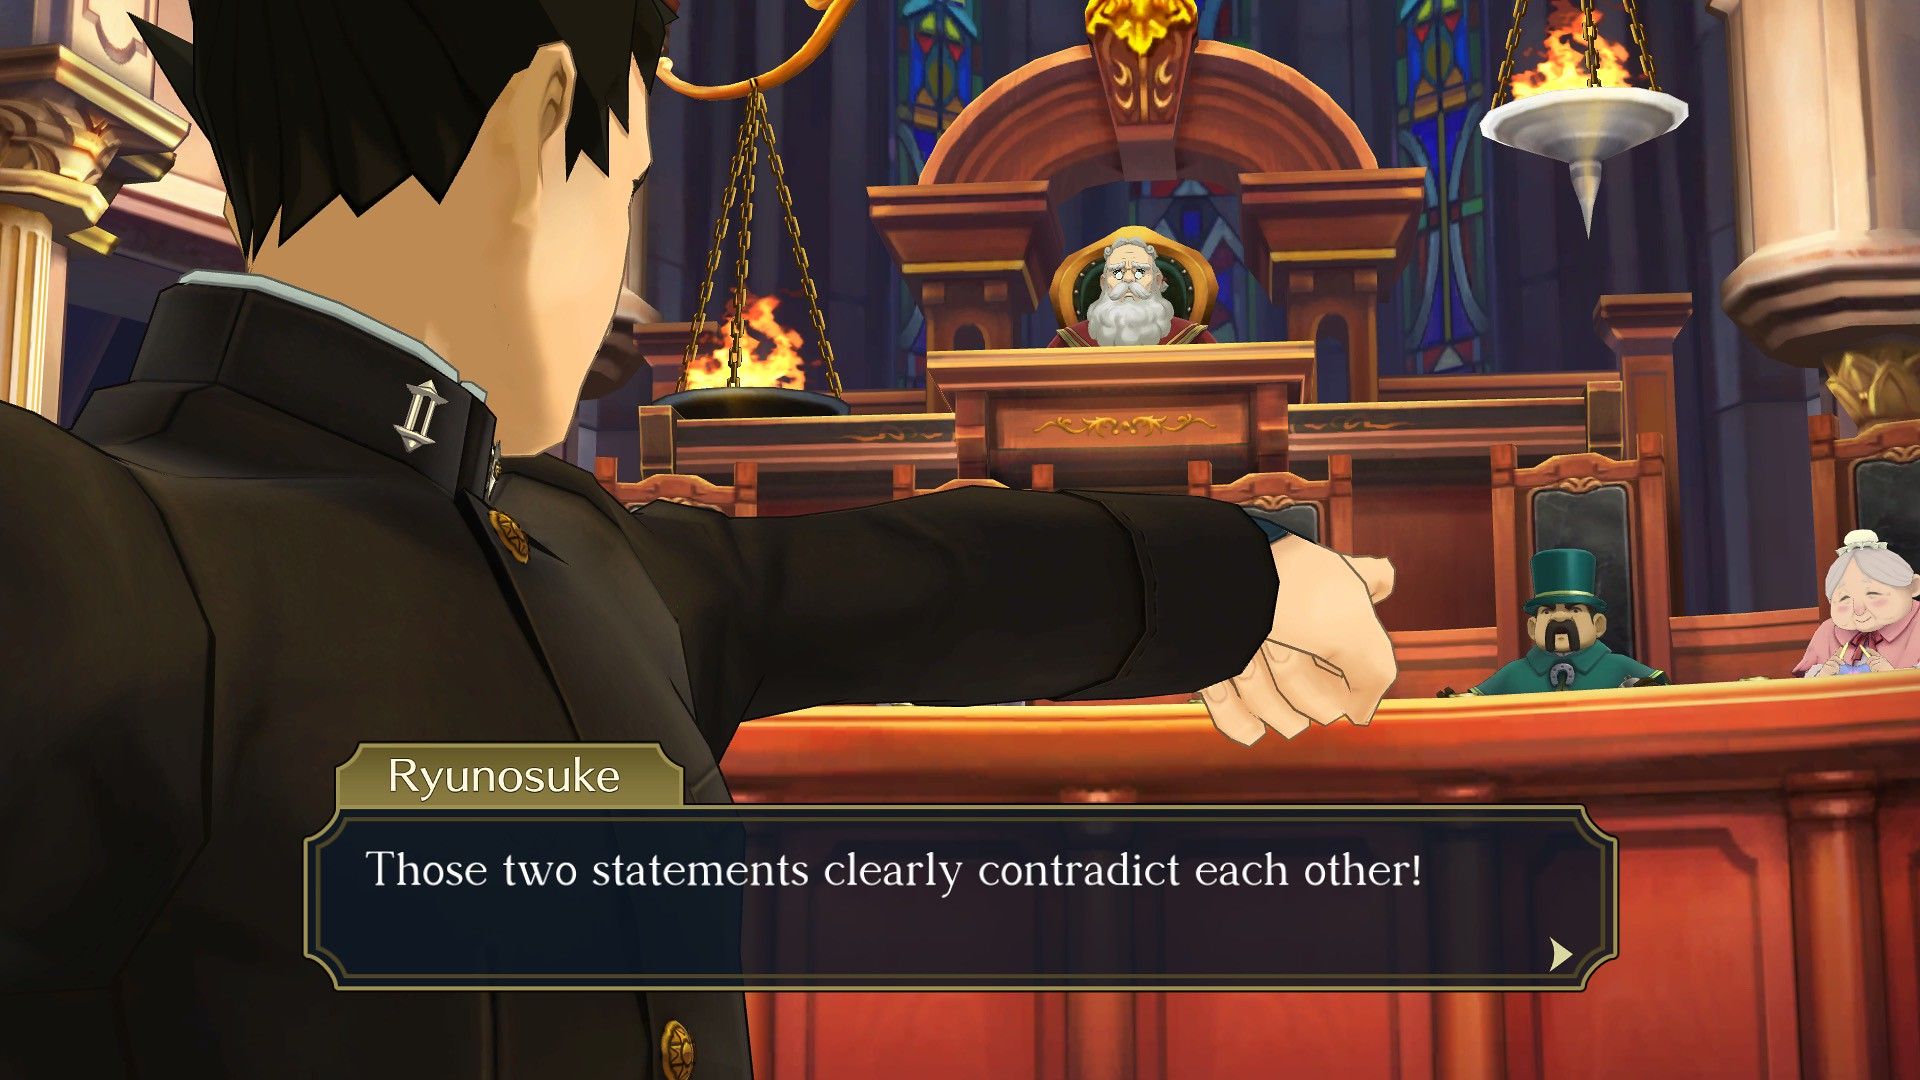 The Great Ace Attorney Chronicles arrives on PS4 July 27